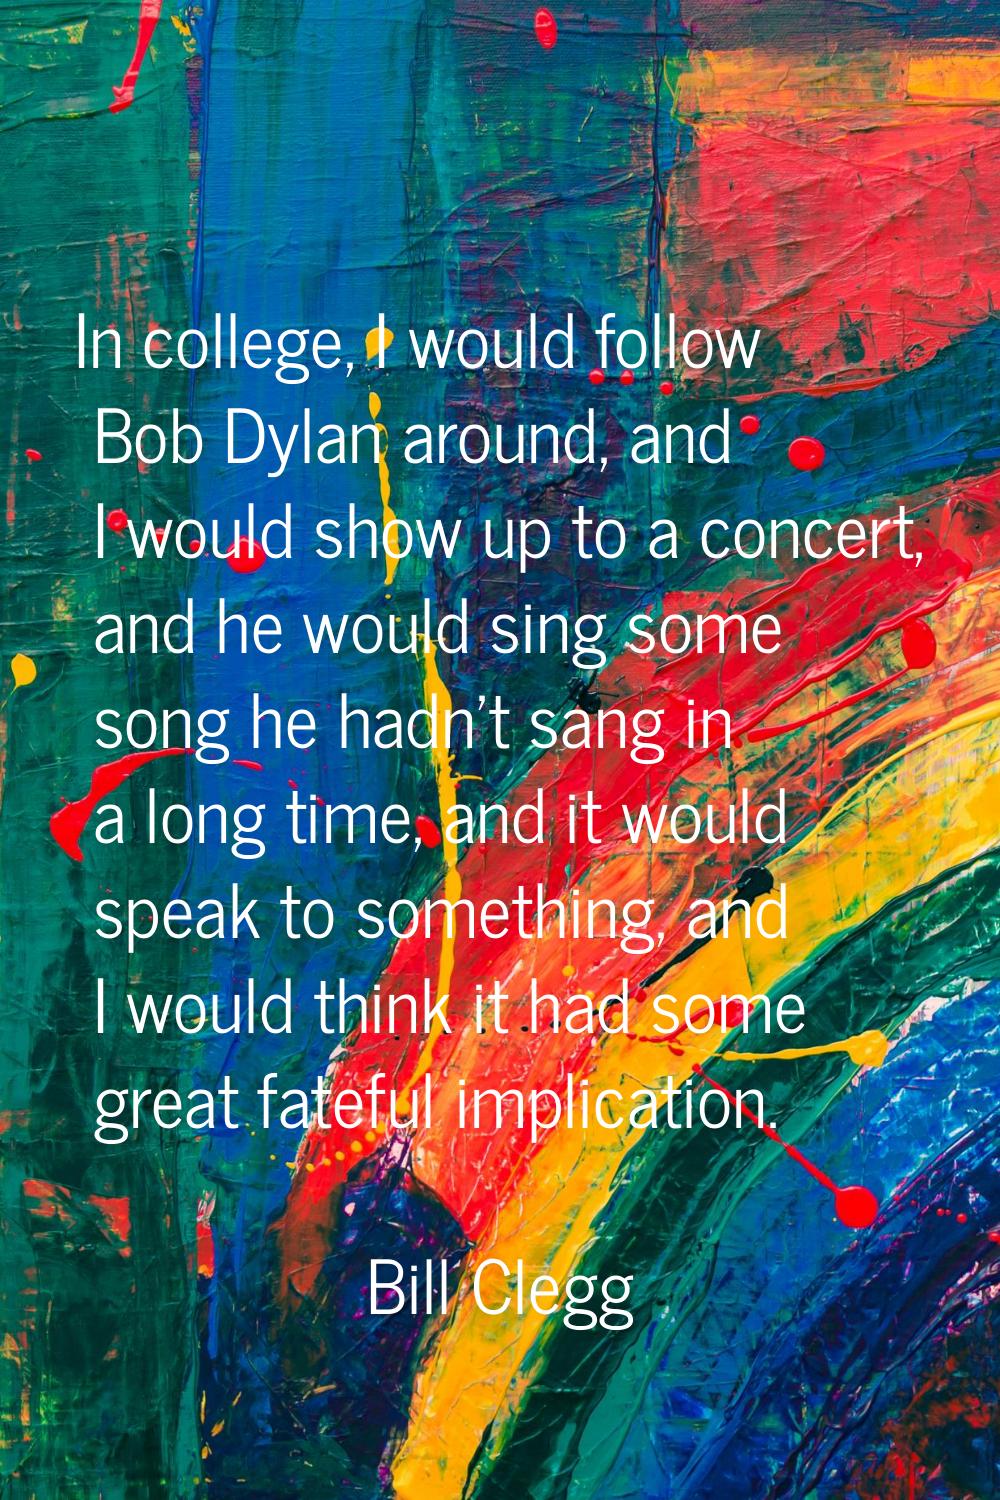 In college, I would follow Bob Dylan around, and I would show up to a concert, and he would sing so